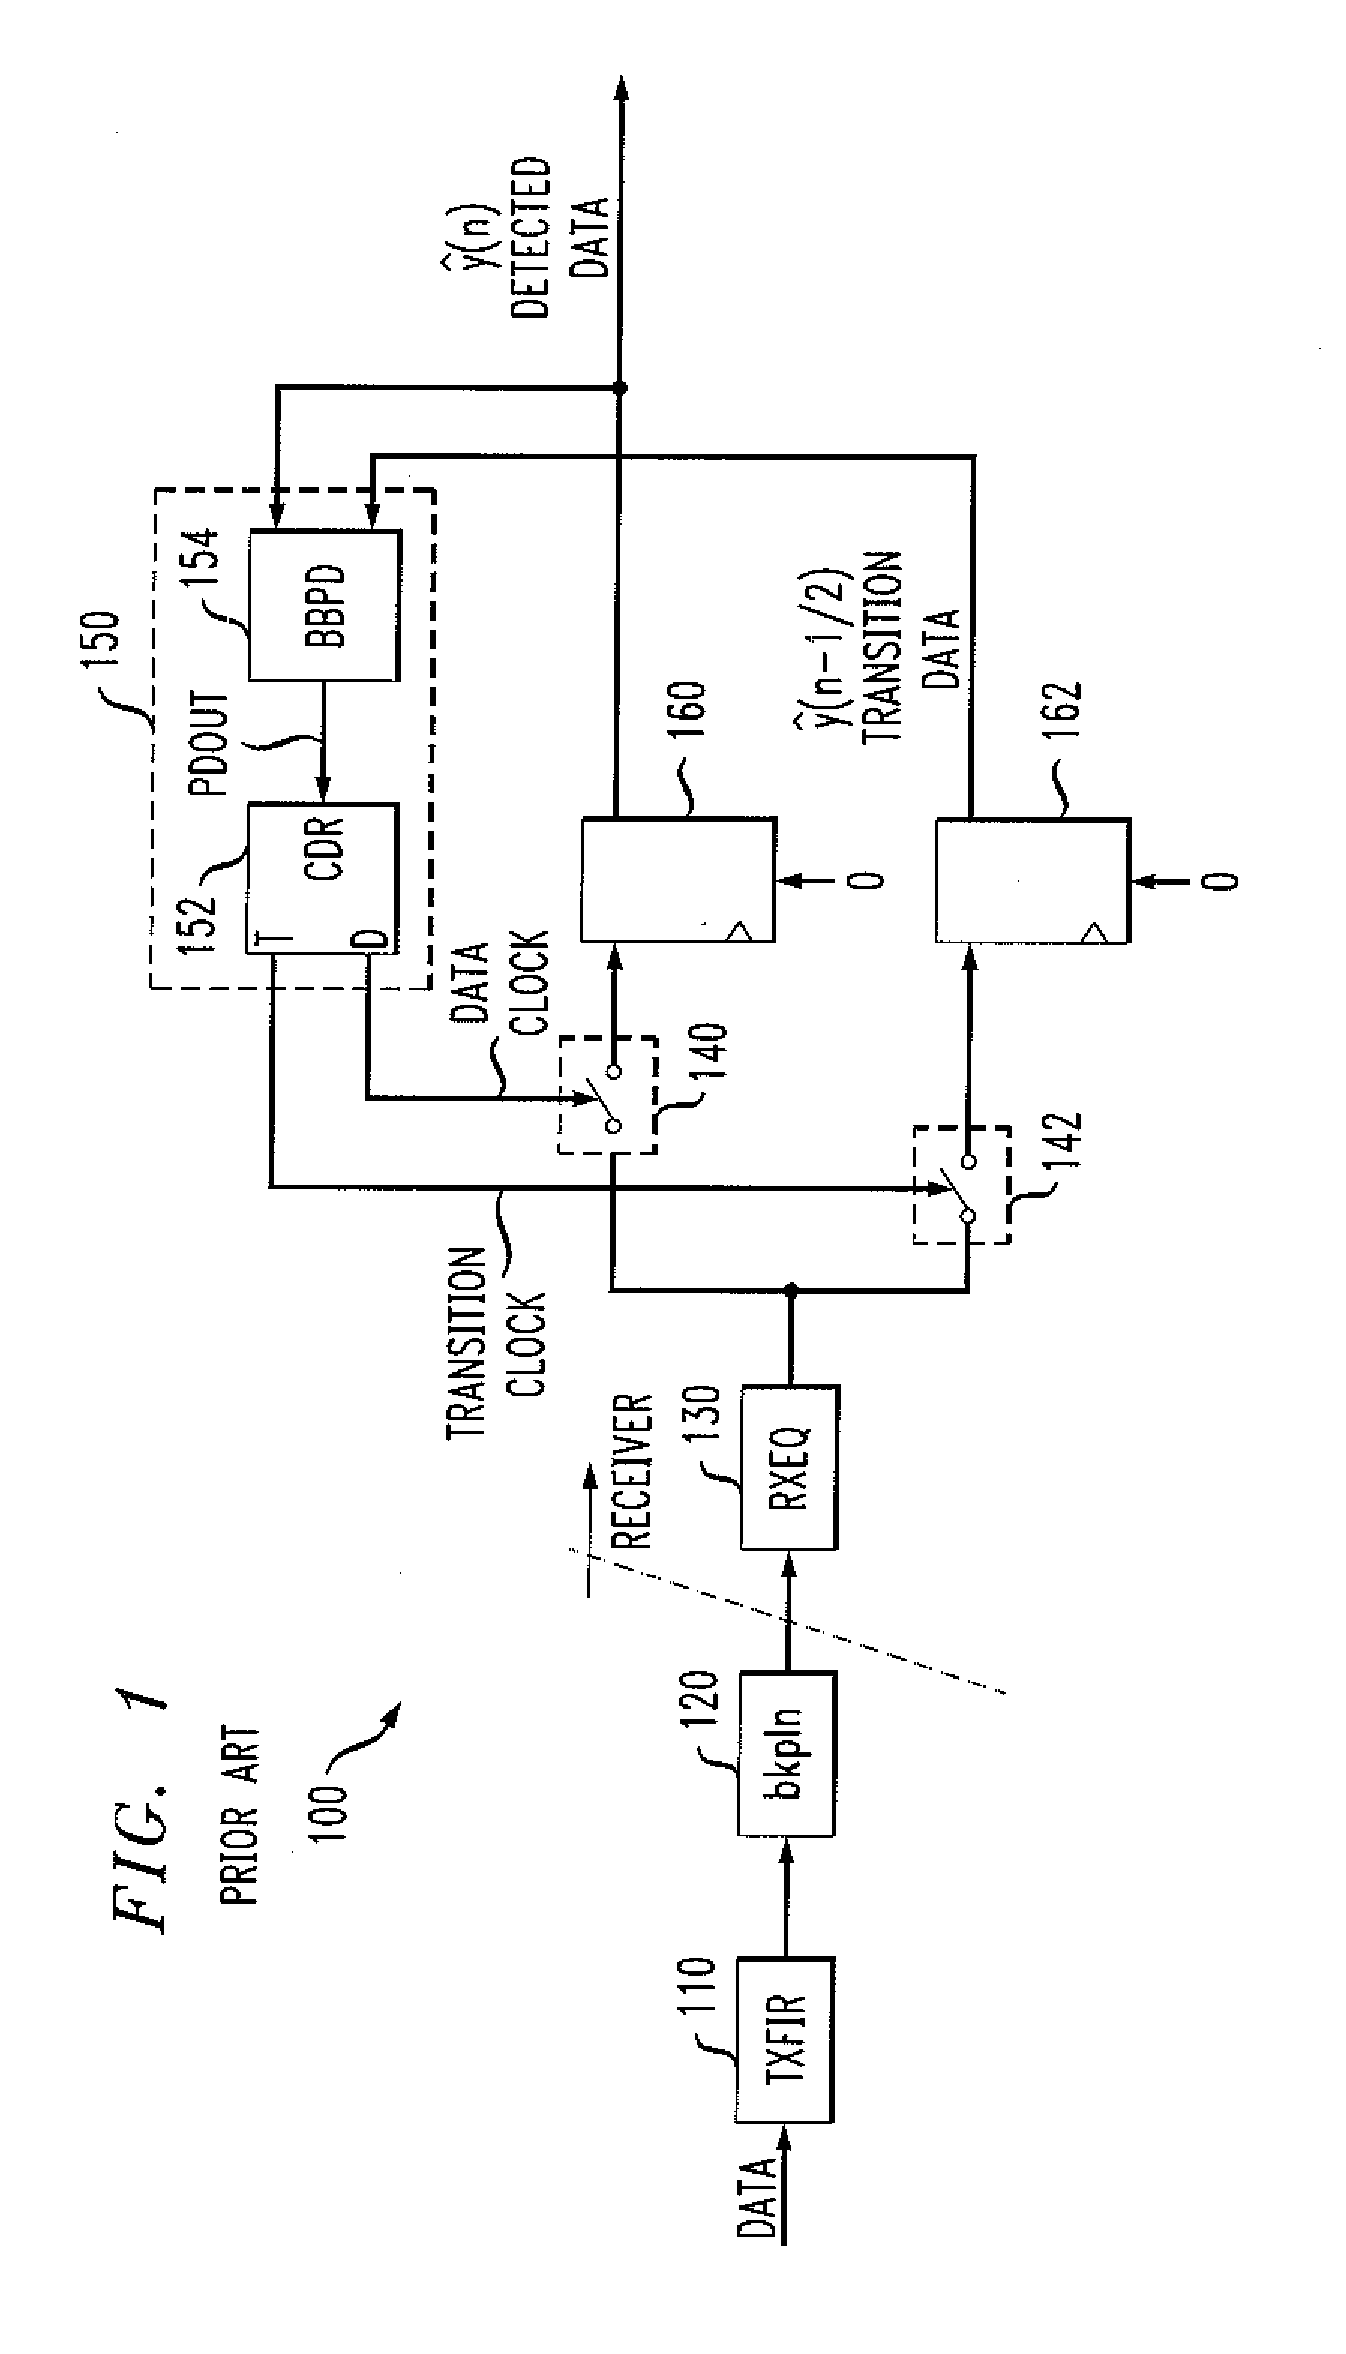 Method and apparatus for generating one or more clock signals for a decision-feedback equalizer using DFE detected data